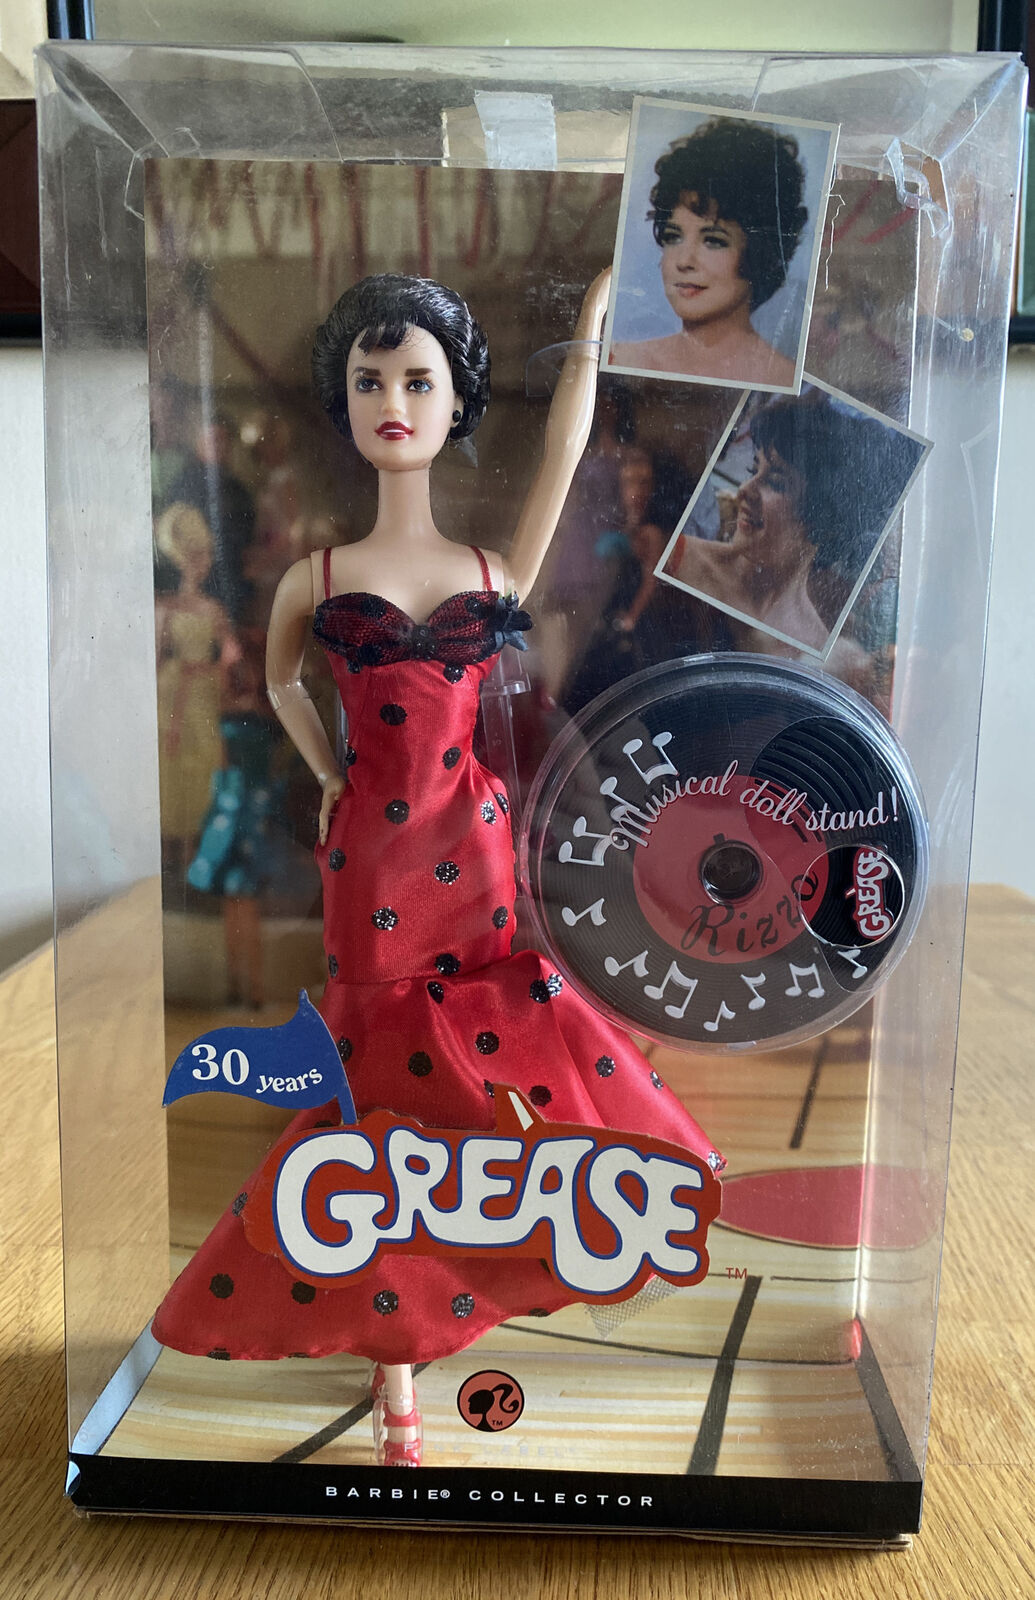 Mattel BARBIE Doll RIZZO Grease Pink Label Edition 30 Years